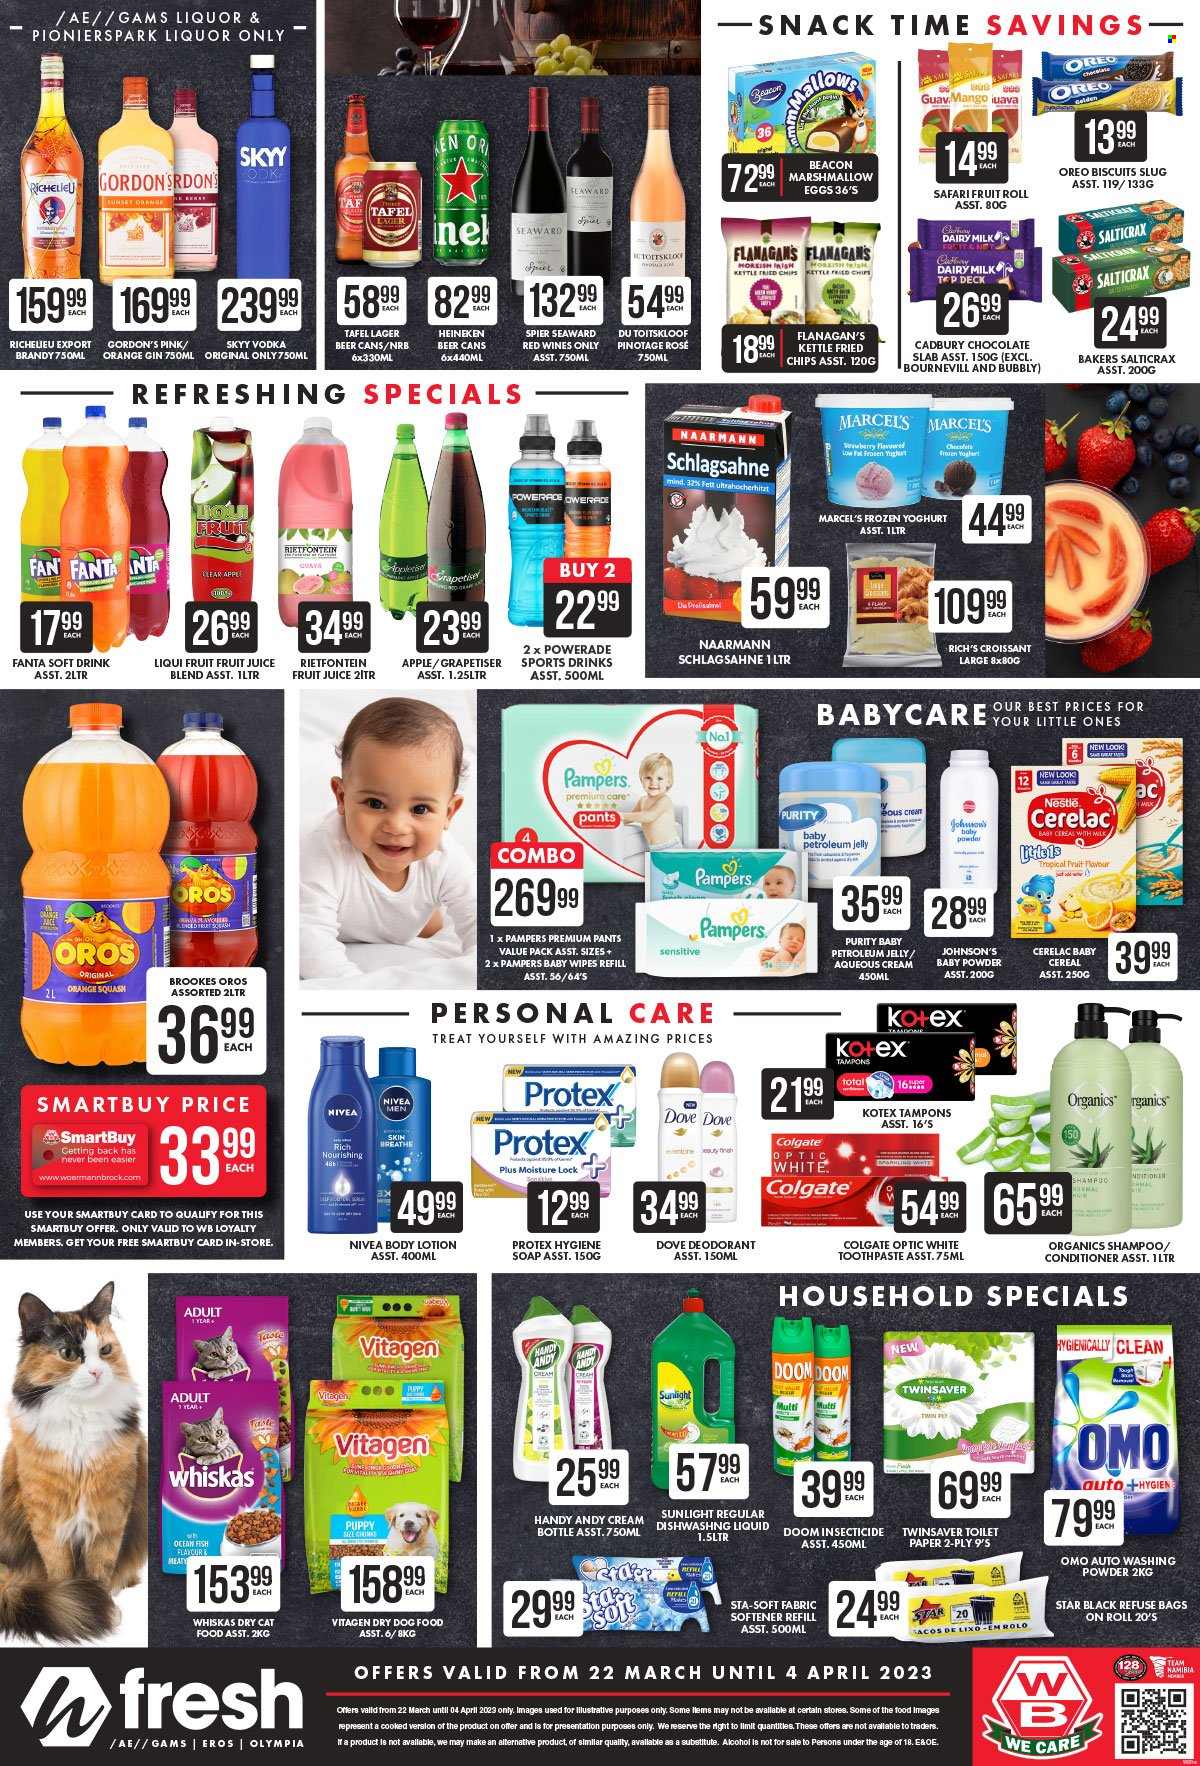 thumbnail - Woermann Brock catalogue  - 22/03/2023 - 04/04/2023 - Sales products - croissant, guava, fish, Oreo, yoghurt, eggs, frozen yoghurt, Dove, marshmallows, Nestlé, chocolate, snack, biscuit, Cadbury, Salticrax, Dairy Milk, cereals, Powerade, Fanta, fruit juice, juice, soft drink, Oros, orange squash, alcohol, rosé wine, brandy, gin, vodka, liquor, Gordon's, SKYY, Richelieu, beer, Heineken, Lager, Purity, wipes, Pampers, pants, baby wipes, Johnson's, fabric softener, Omo, softener refill, laundry powder, Sunlight, shampoo, Nivea, Protex, soap, Colgate, toothpaste, Kotex, tampons, petroleum jelly, conditioner, body lotion, anti-perspirant, deodorant, animal food, cat food, dog food, Whiskas, Bakers, dry dog food, dry cat food. Page 4.